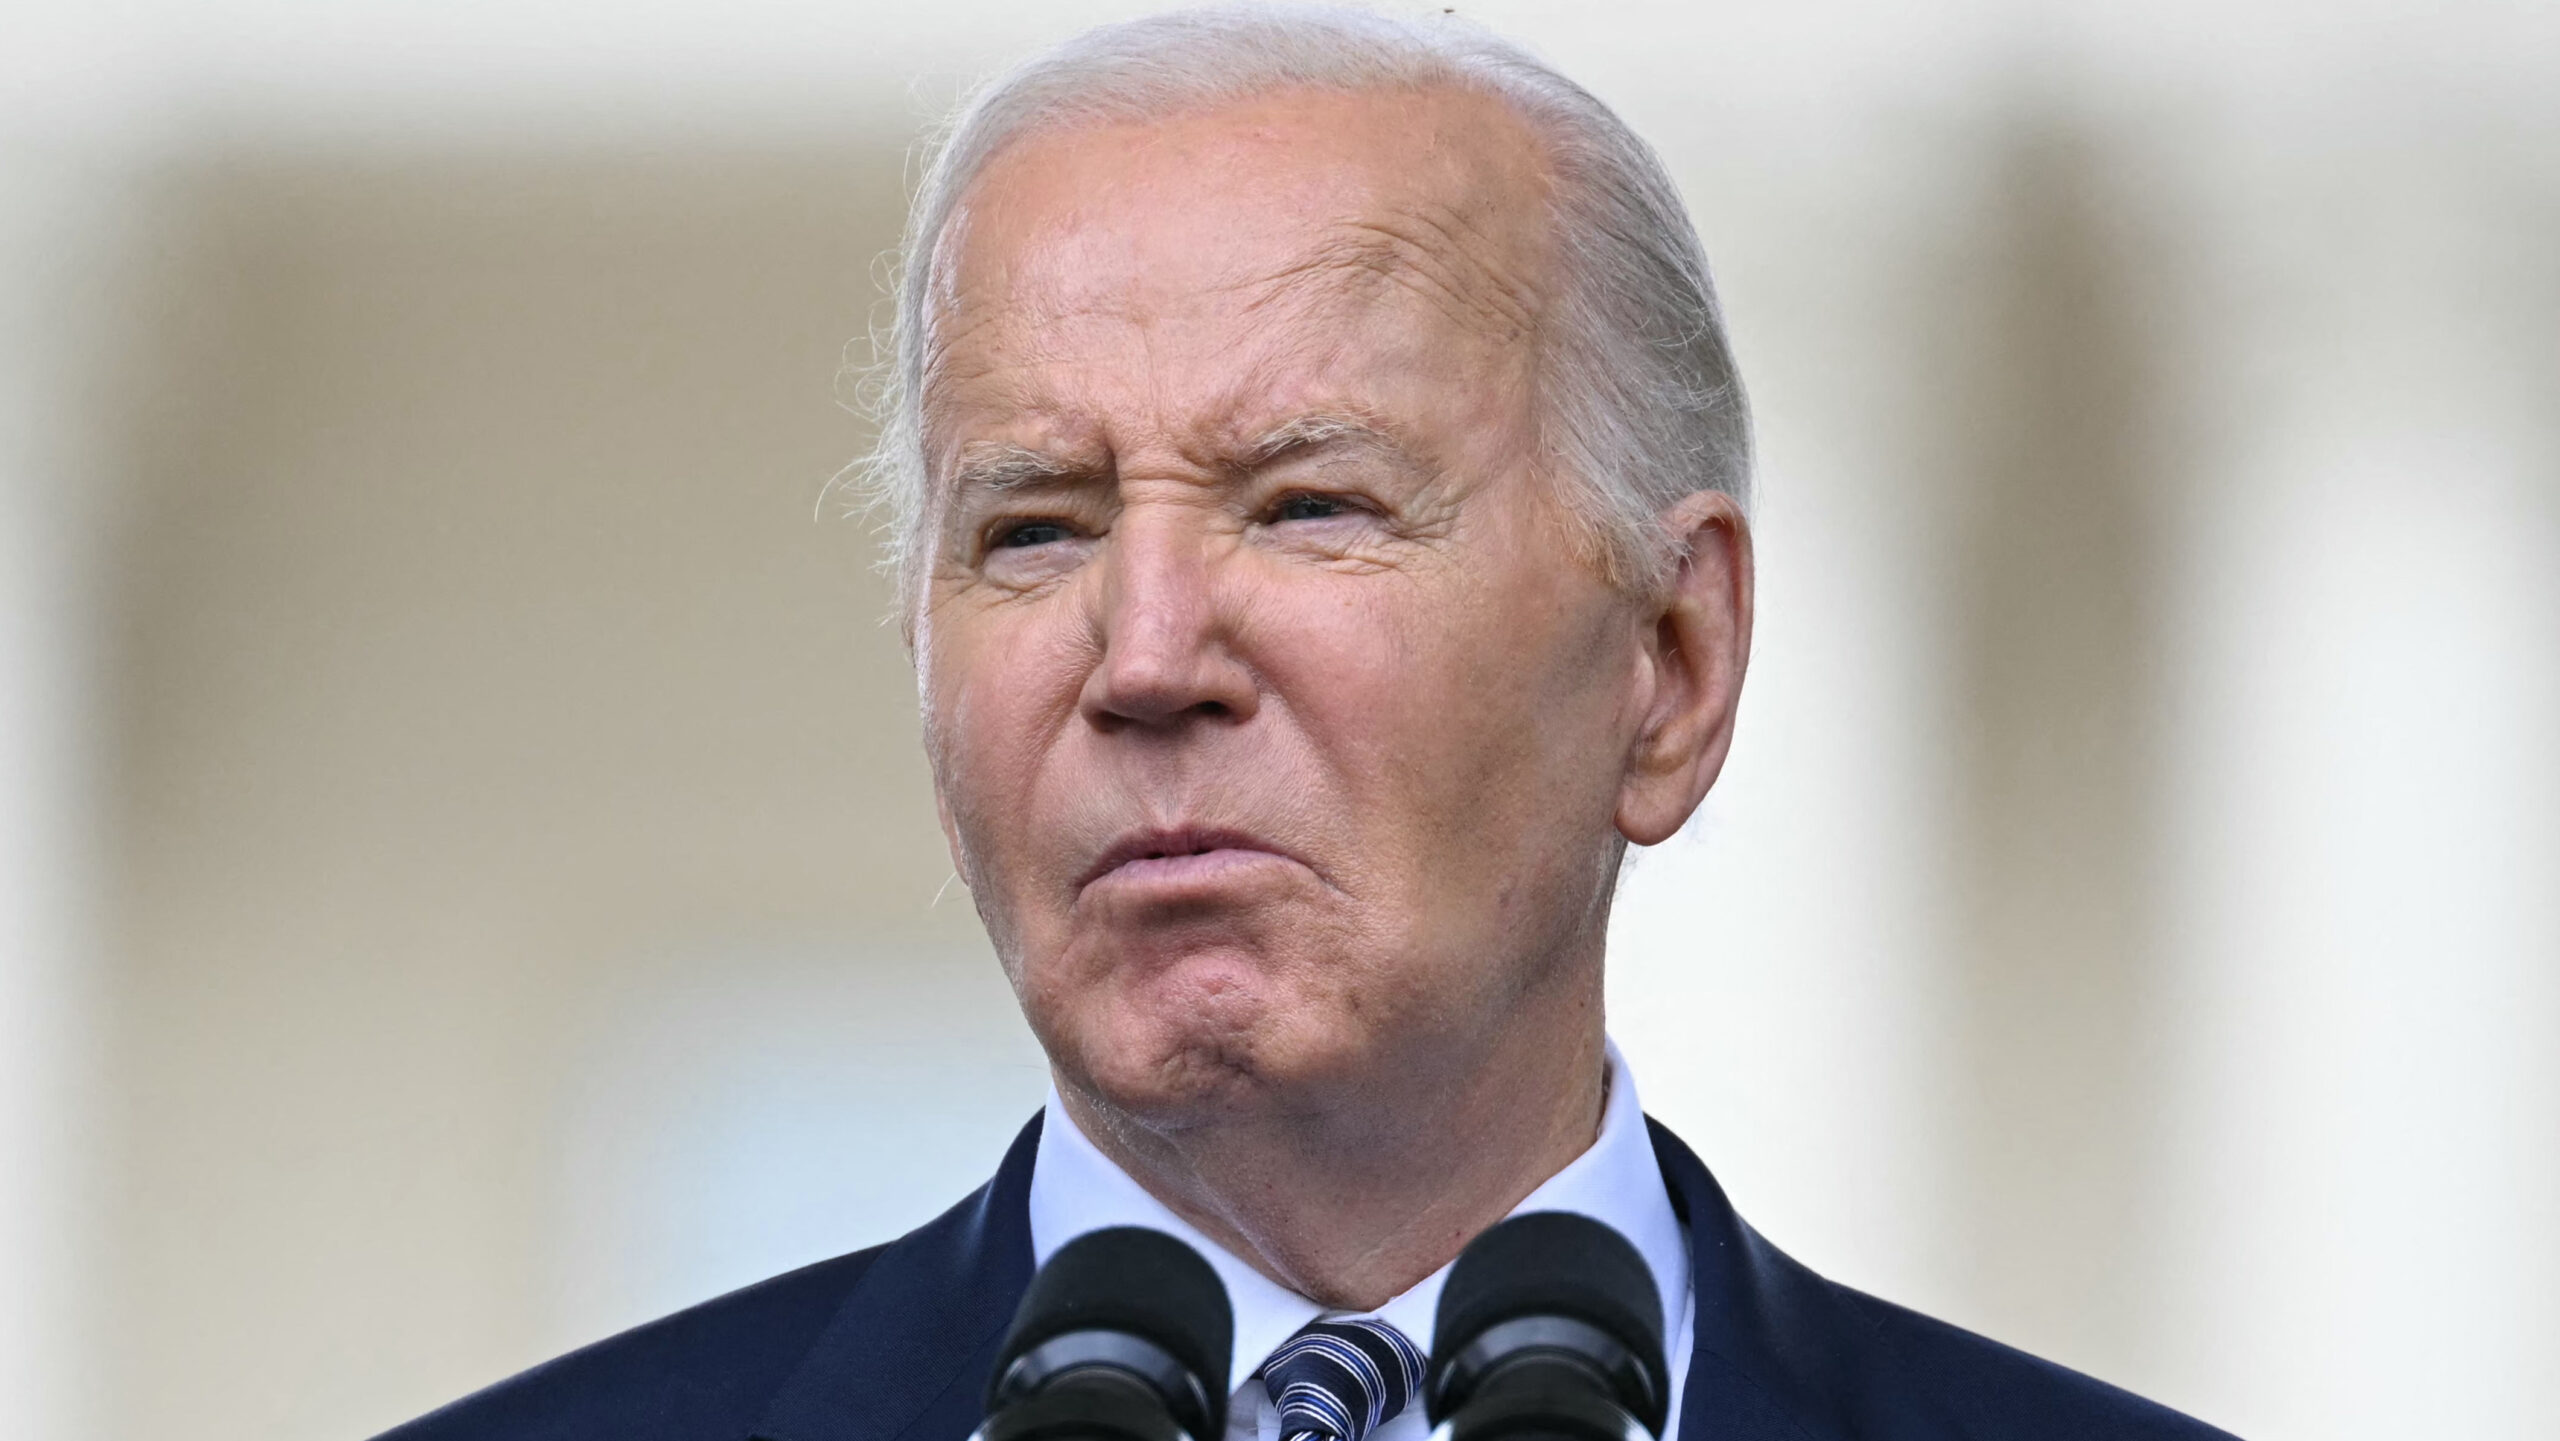 Biden Pushes World To Not Censure Iran Over Its Illegal Nuclear Program As It Nears Critical Mass: Report